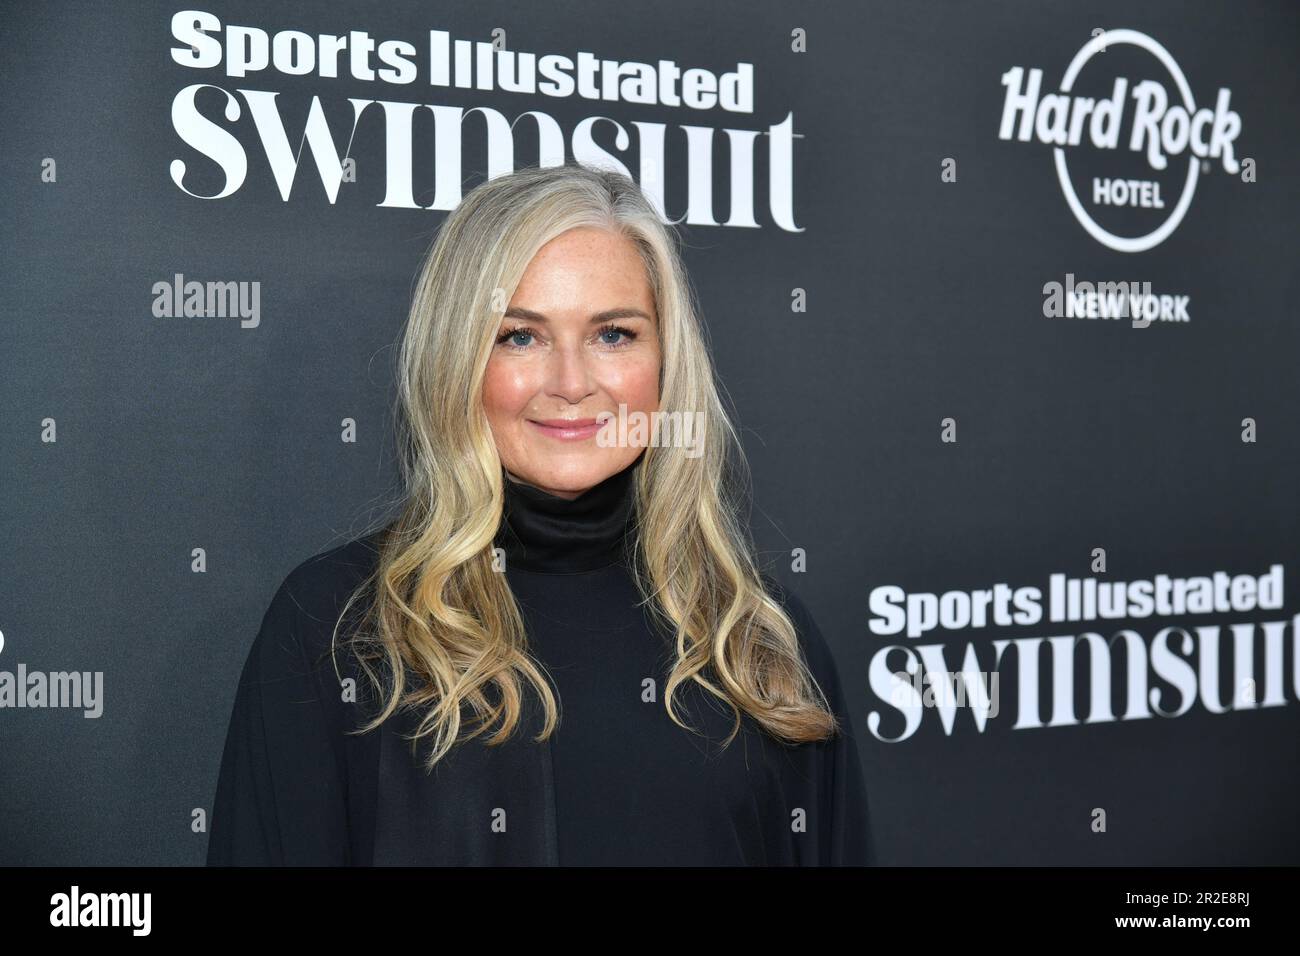 Sports Illustrated Swimsuit Editor in Chief MJ Day Stock Photo